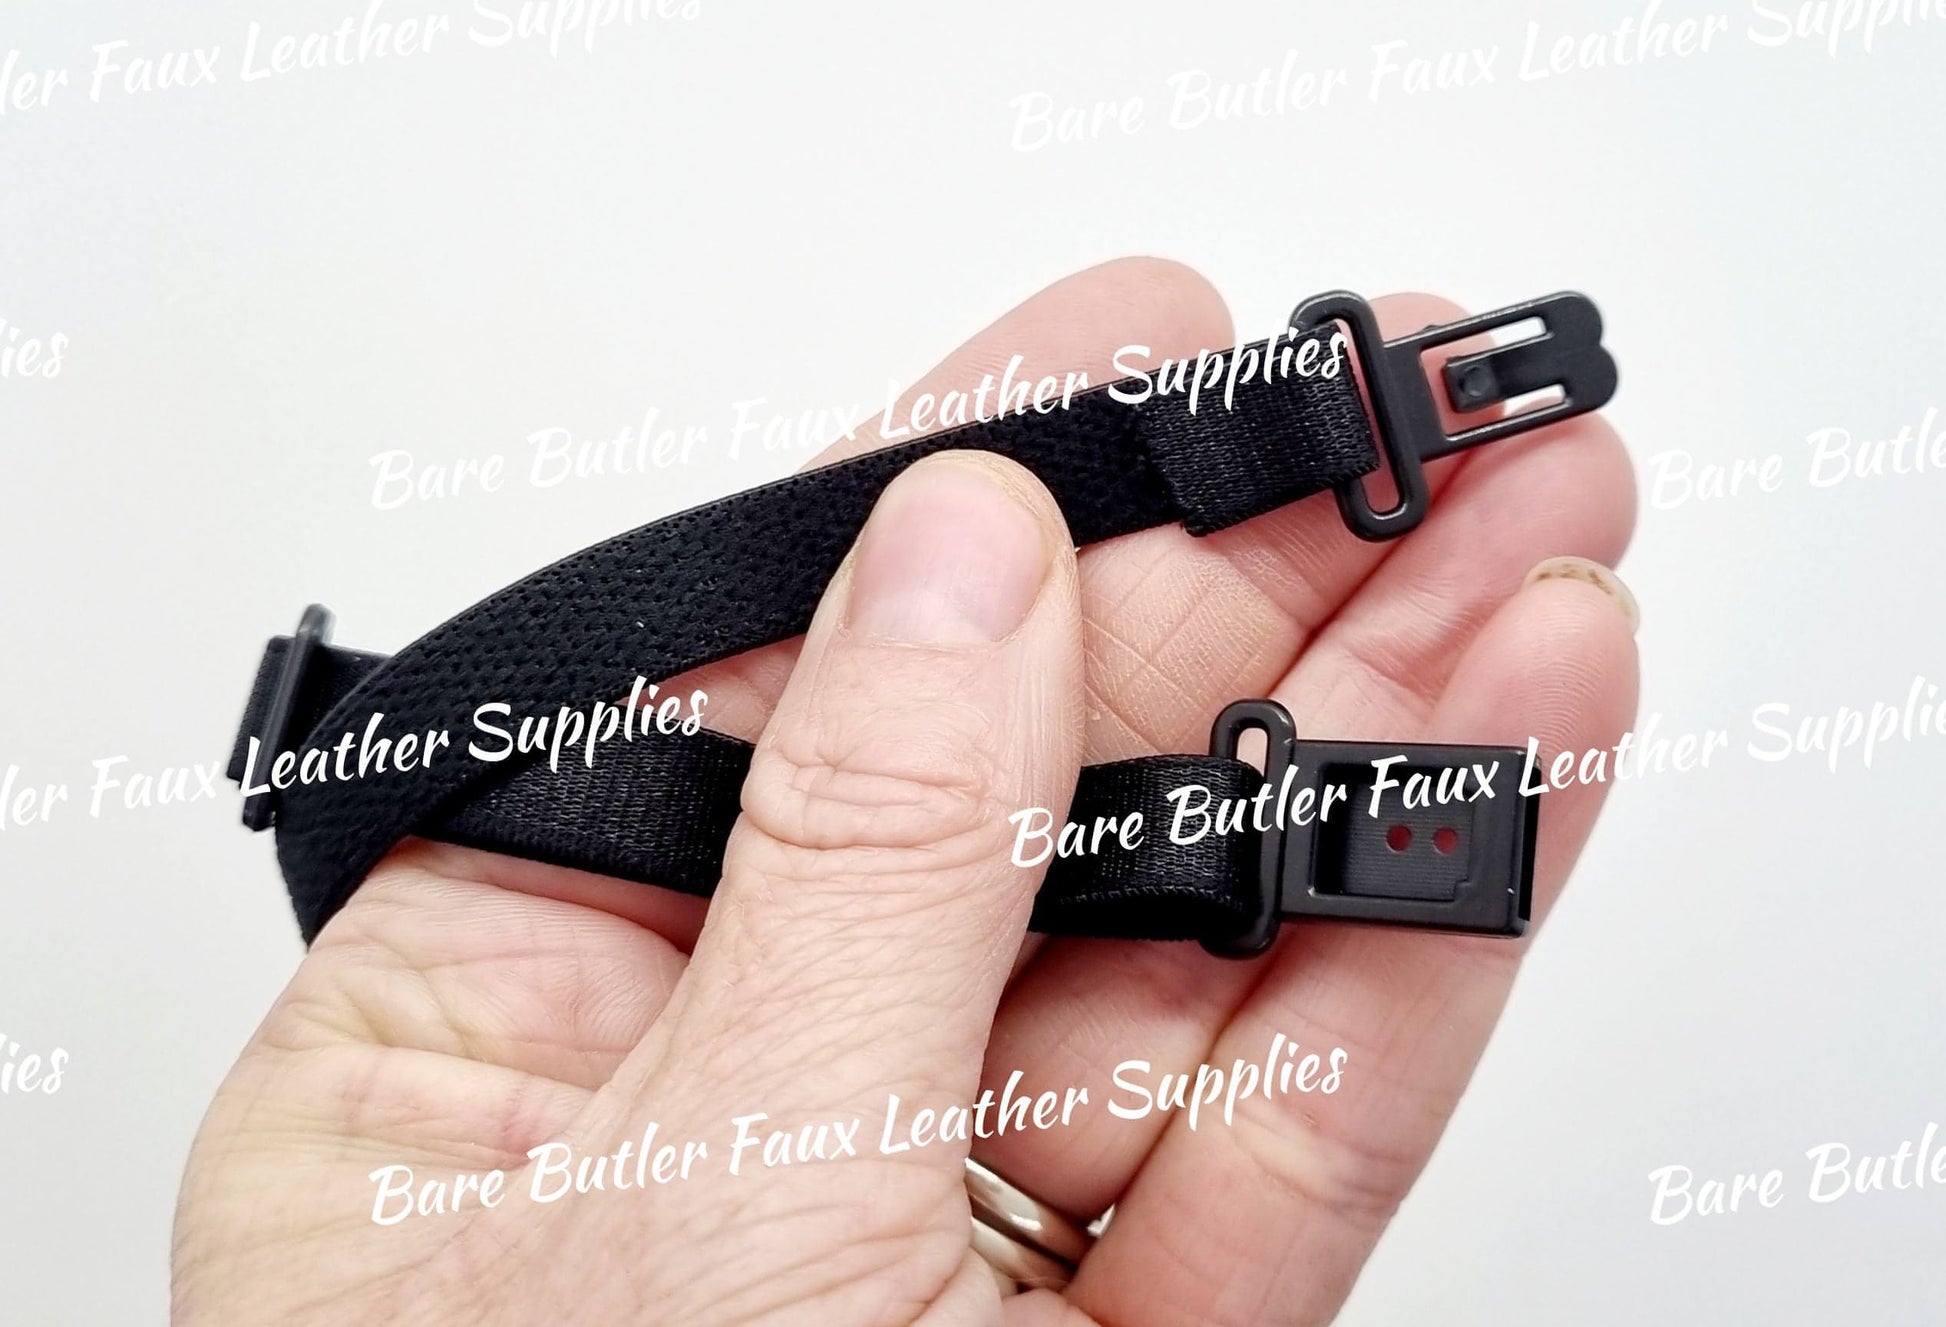 Bow Tie Straps - Bare Butler Faux Leather Supplies 